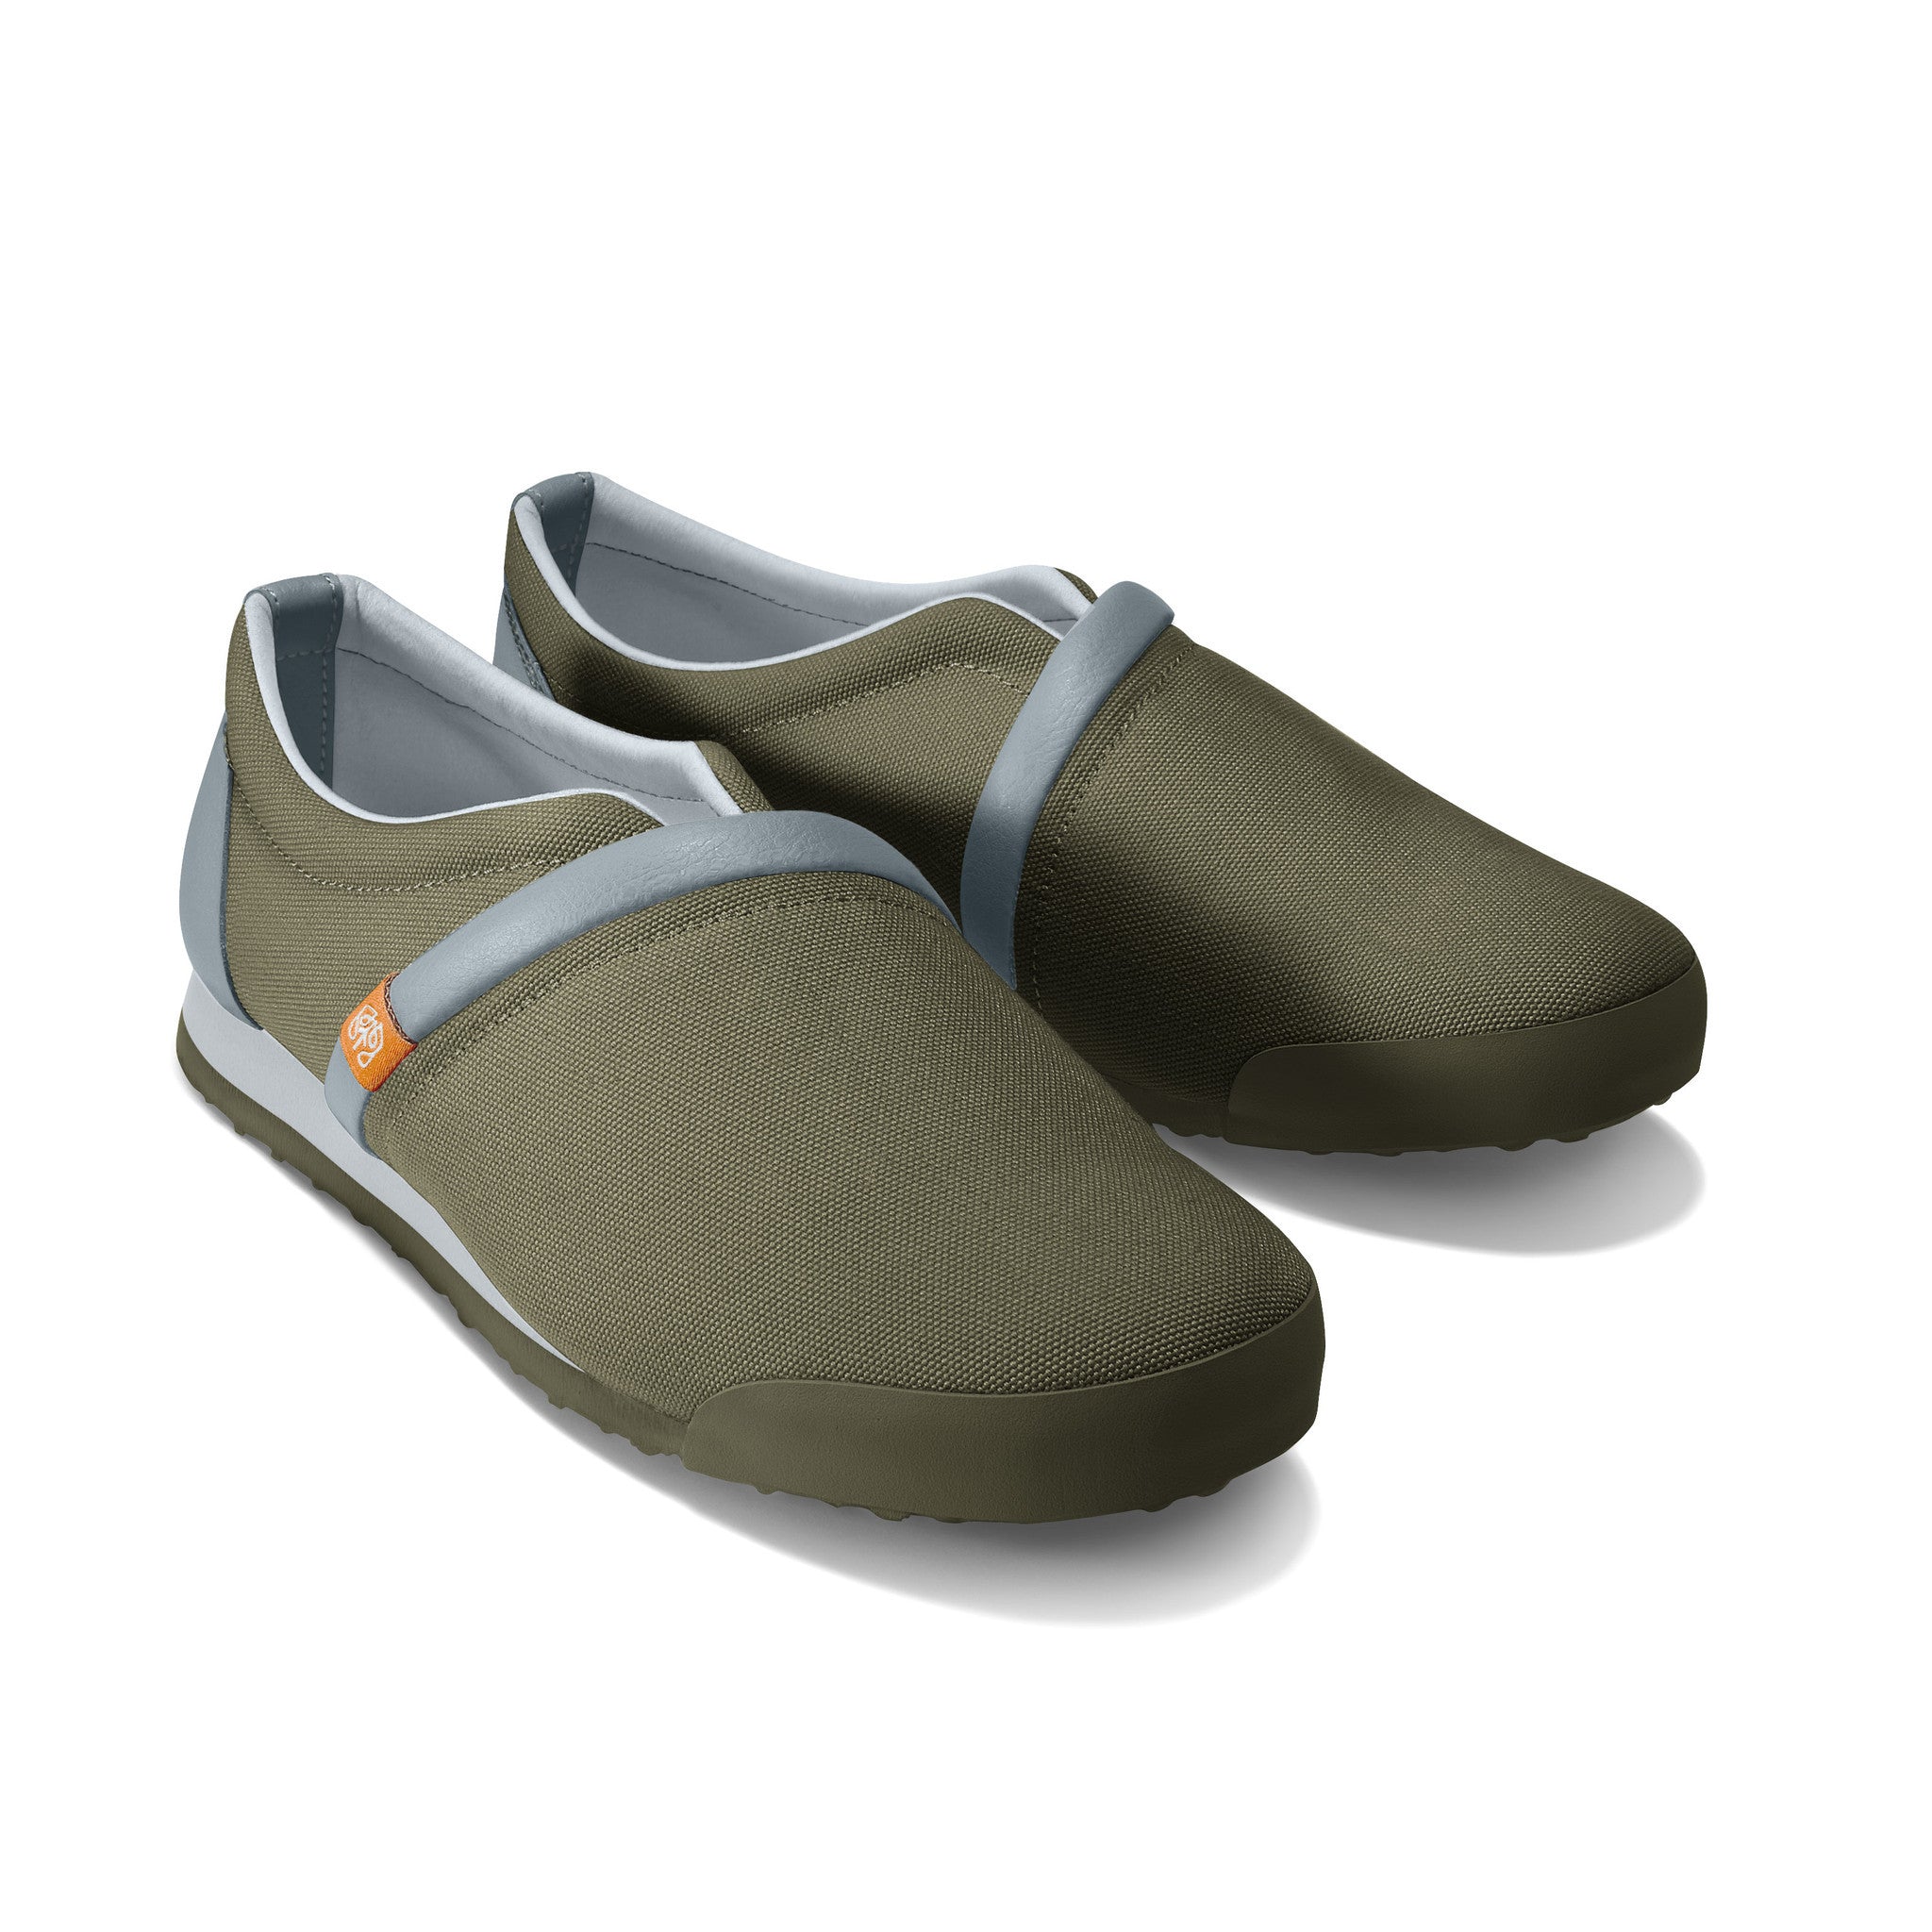 Military_Olive - Common Ground Footwear Shoes Right Perspective View